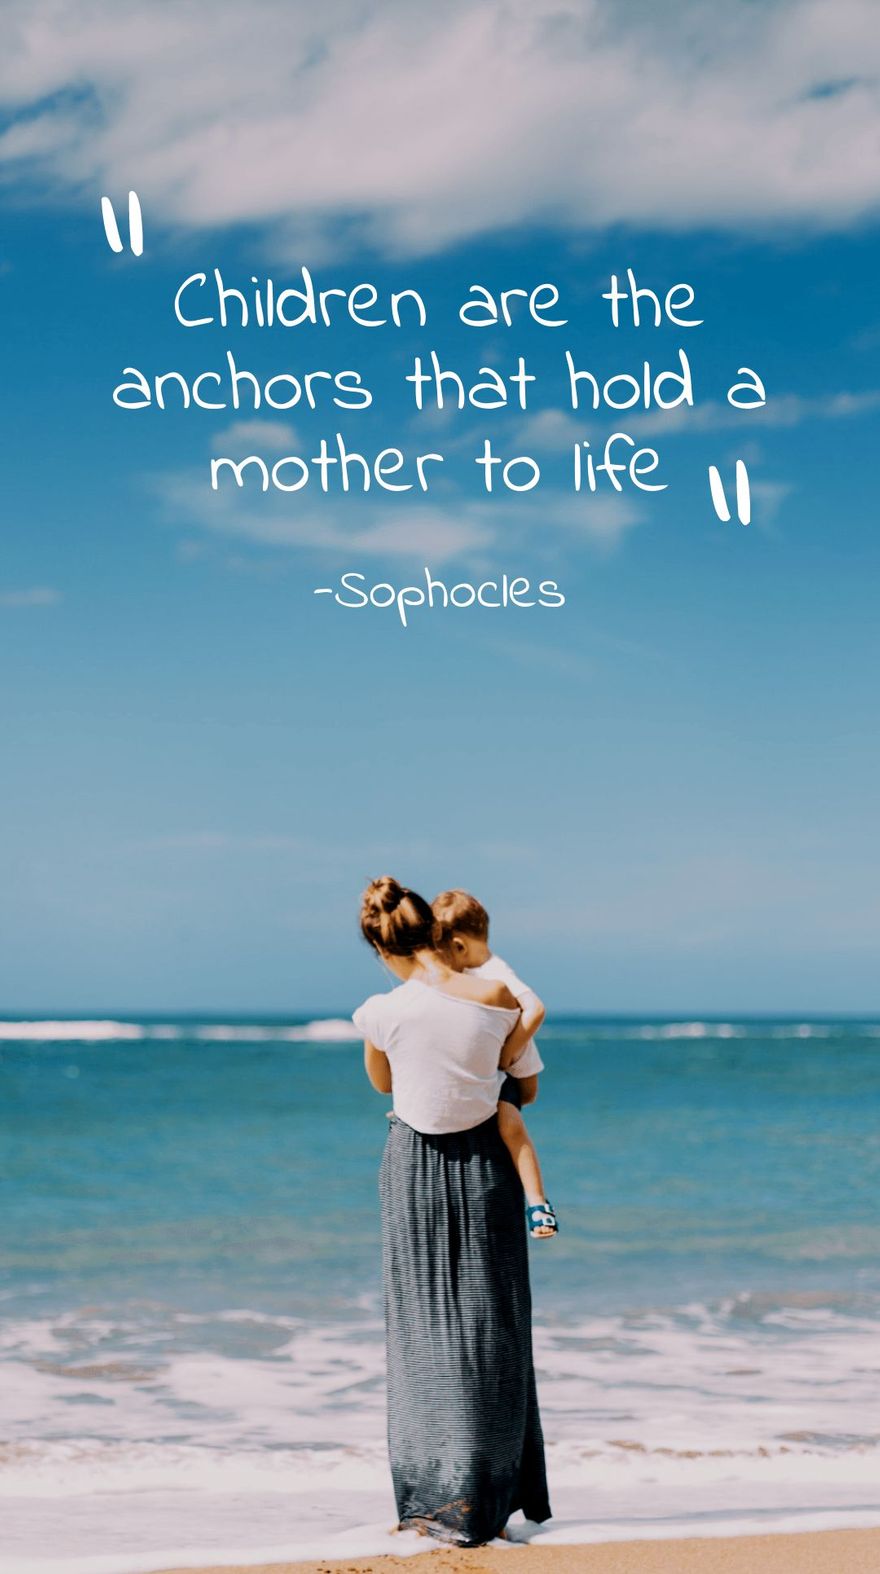 Free Sophocles - Children are the anchors that hold a mother to life. 